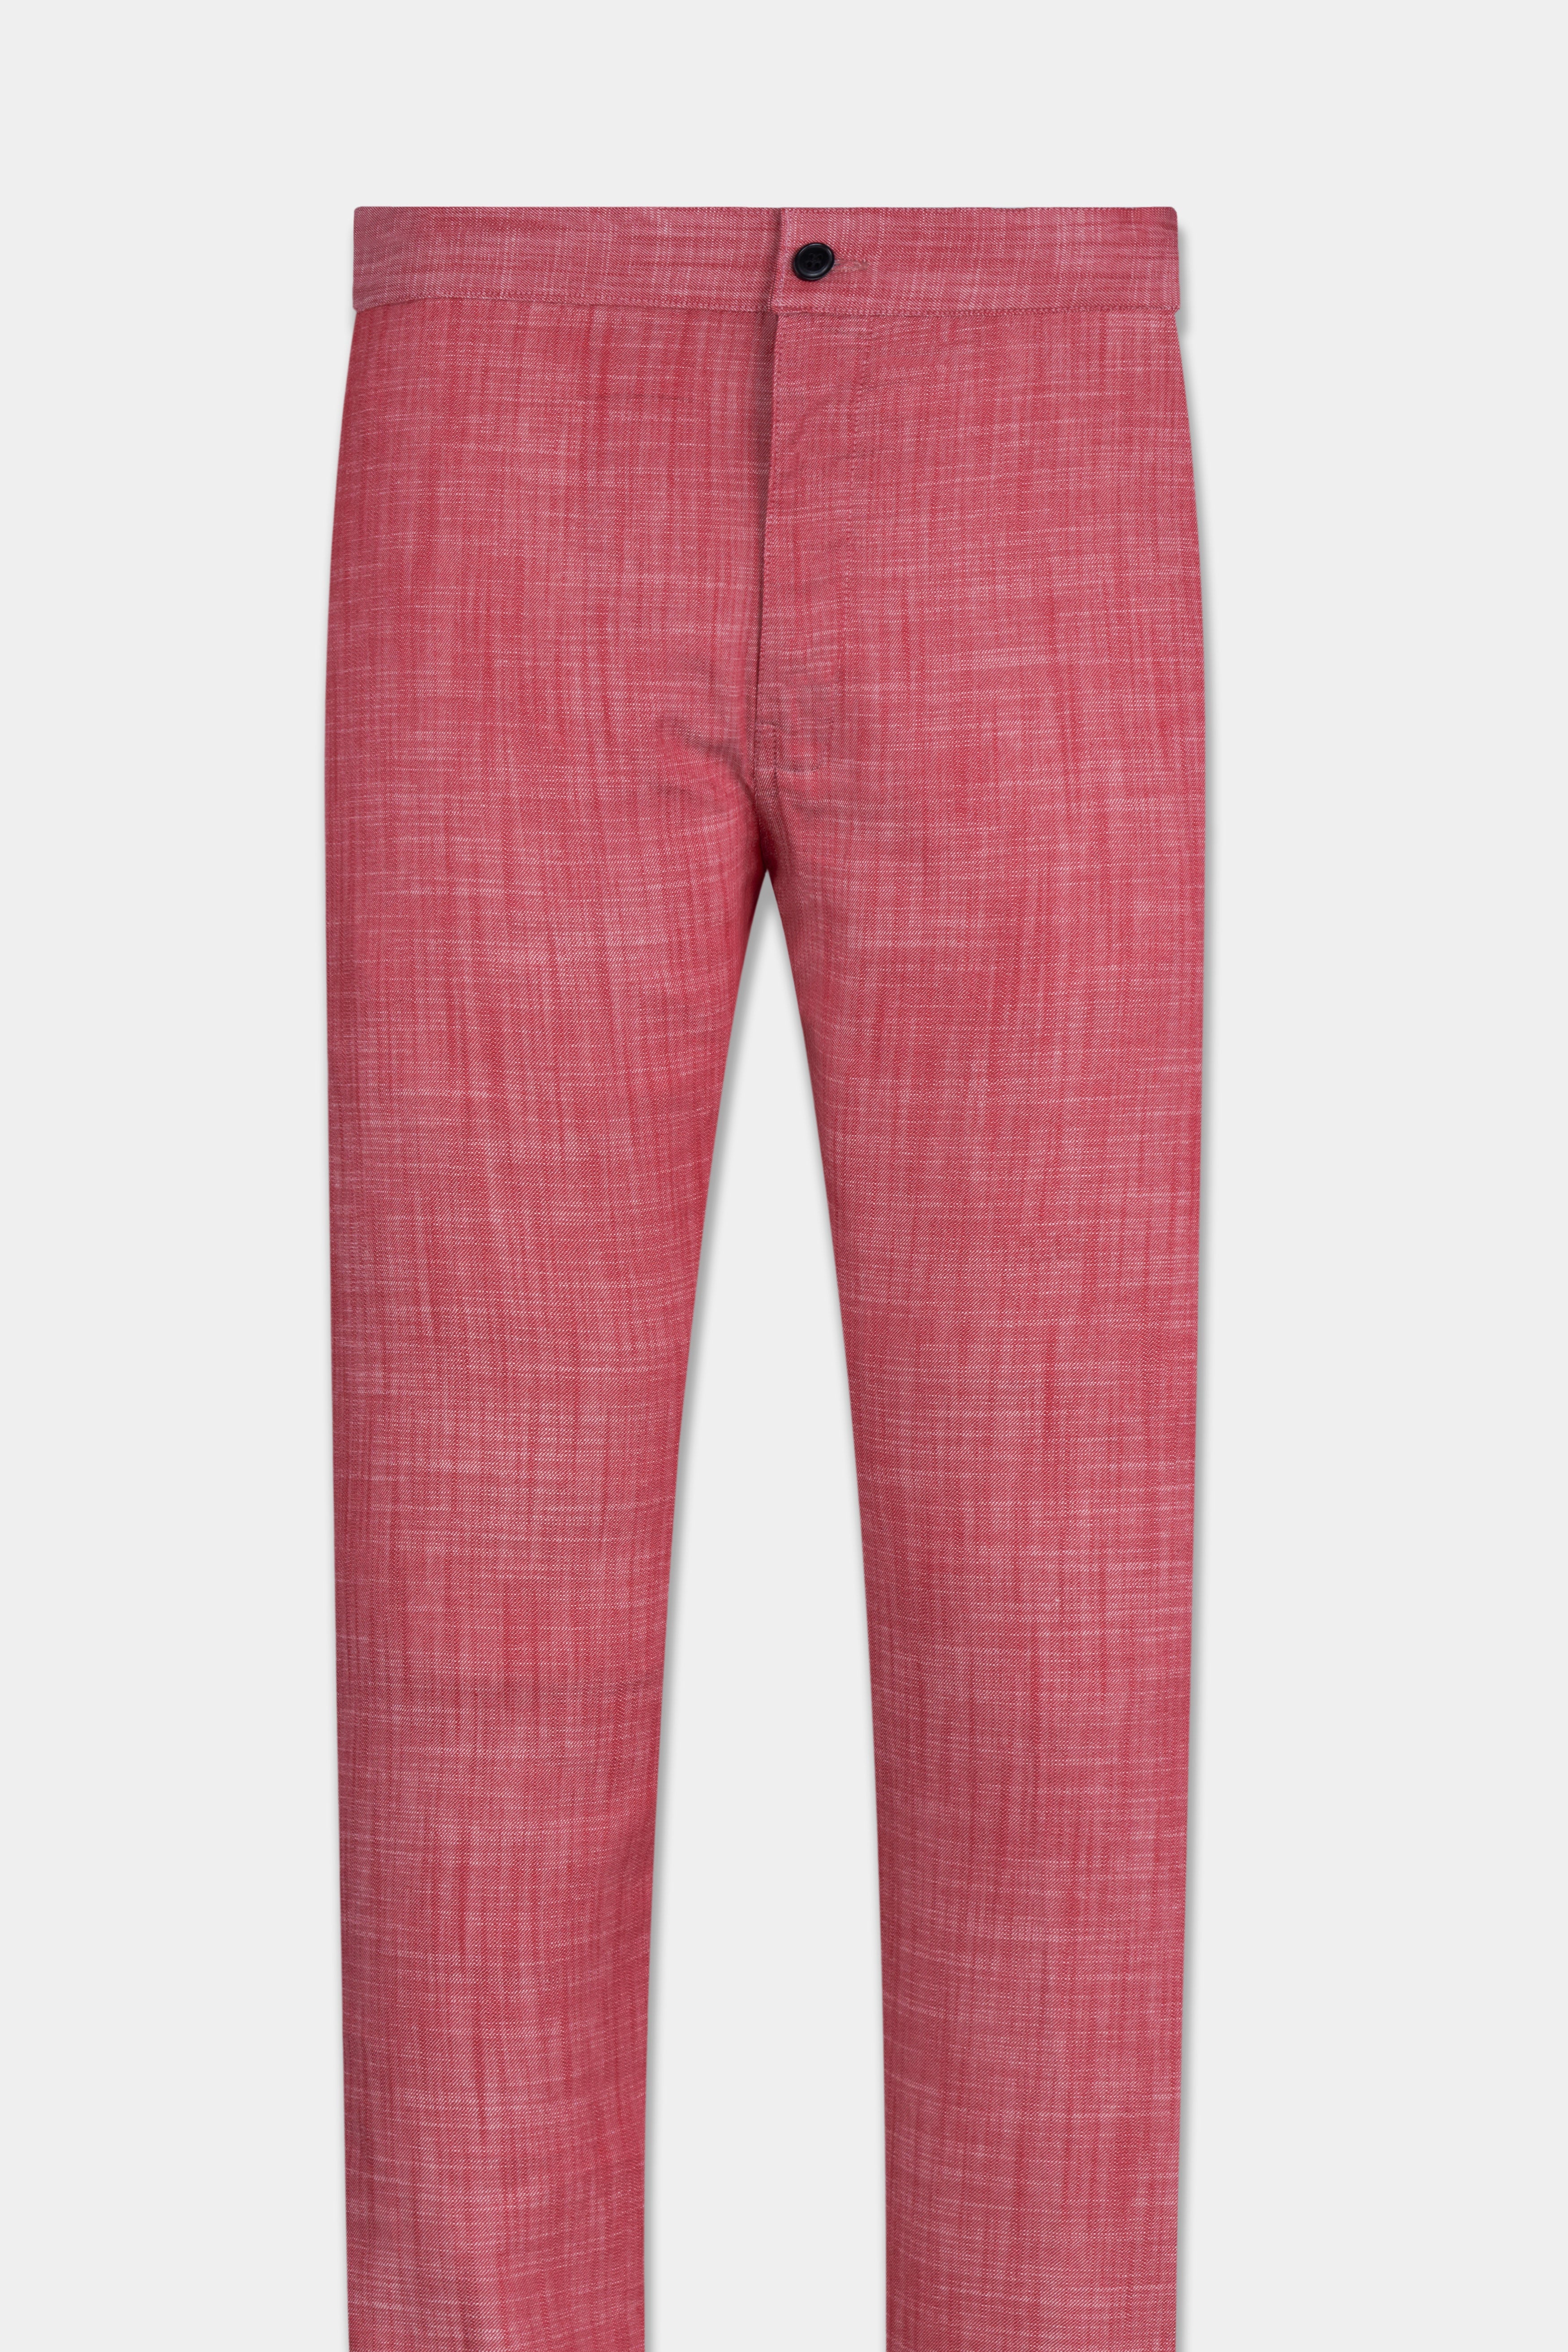 Chestnut Rose Red Chambray Premium Cotton Lounge Pant